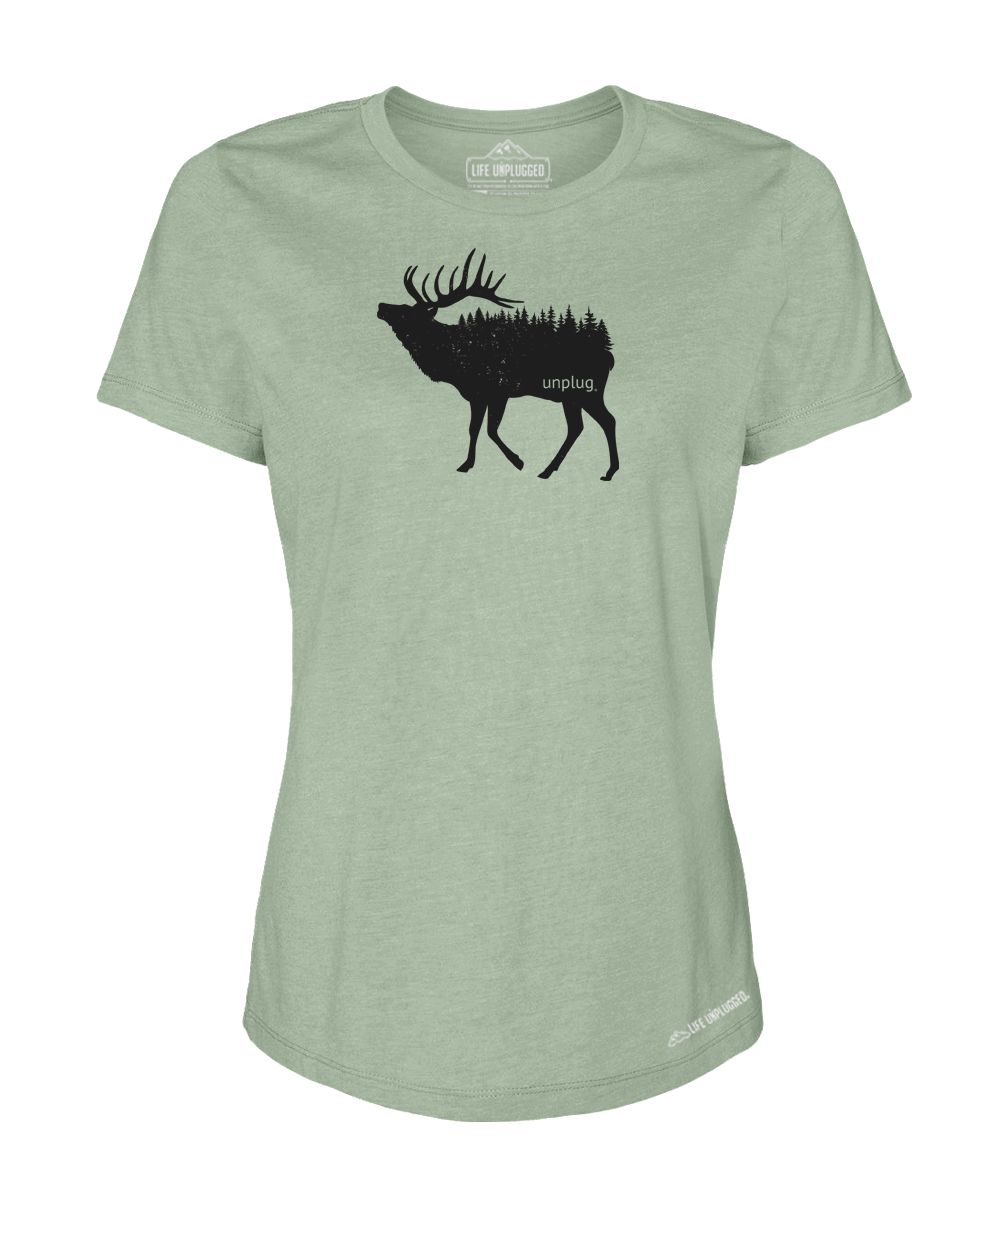 Elk In The Trees Premium Women's Relaxed Fit Polyblend T-Shirt